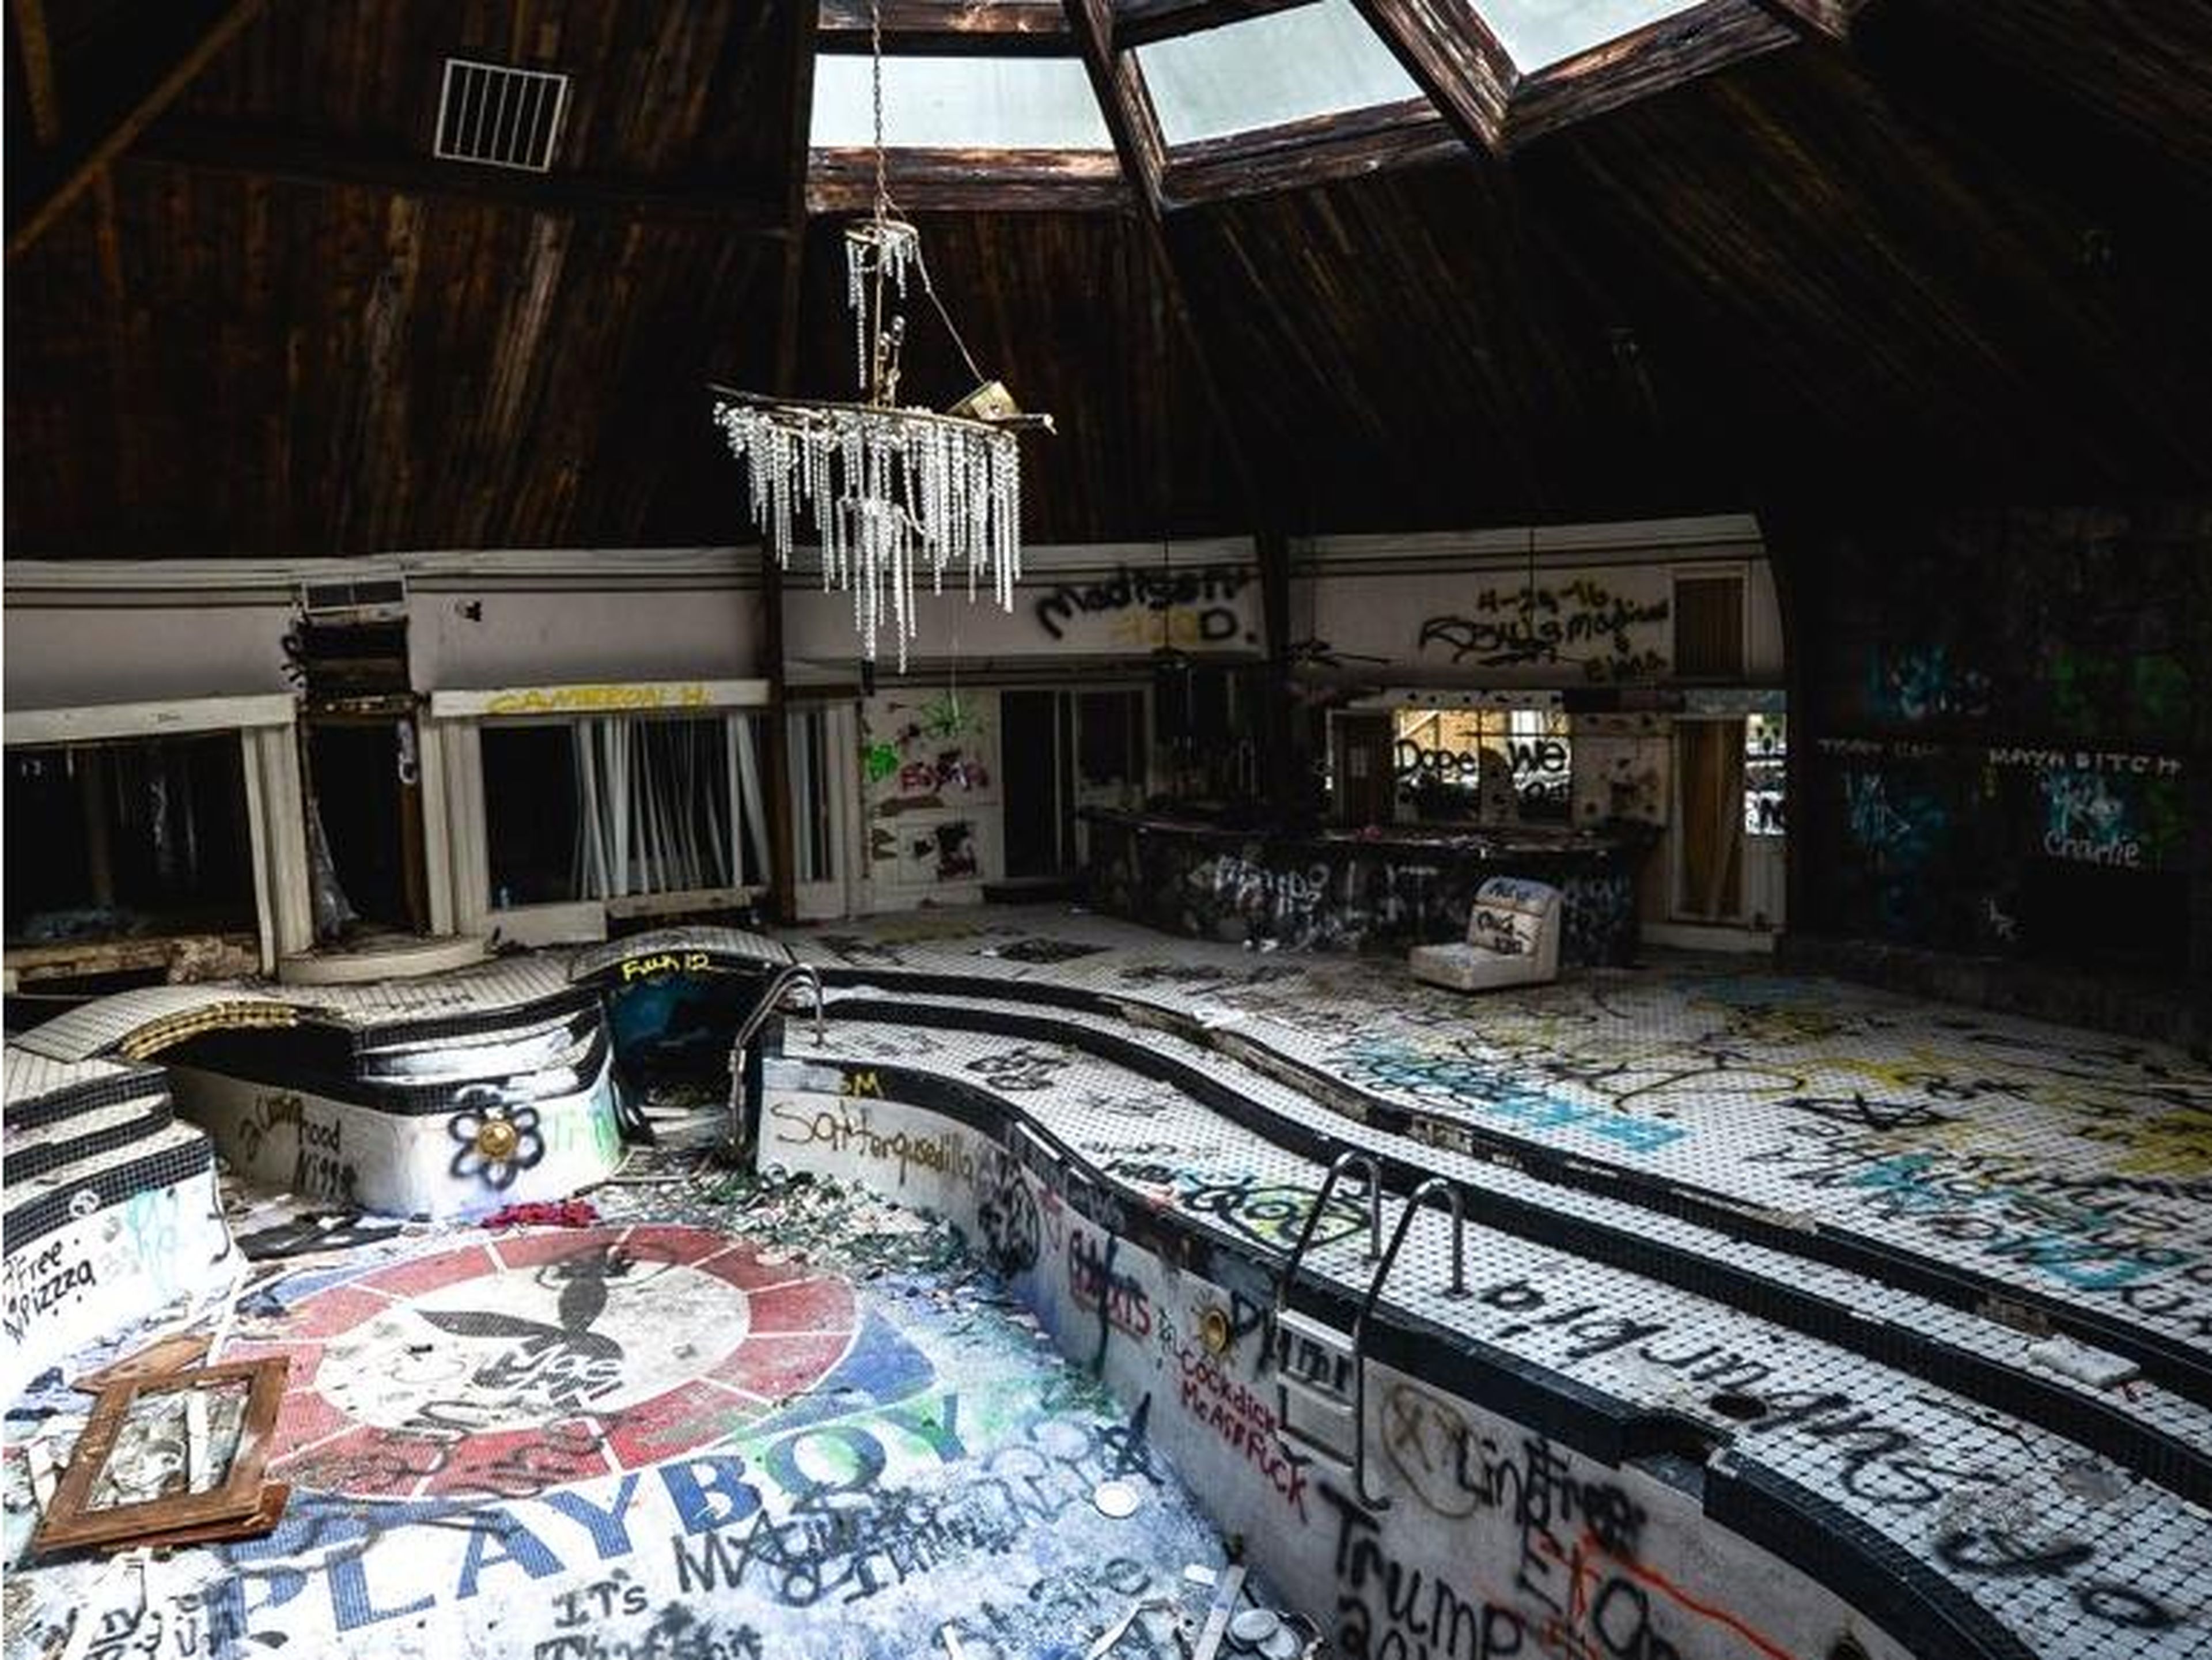 The unique structure felt into decay after Hull was arrested for tax evasion. The now-abandoned mansion is known for its Playboy bunny pool and its dramatic history.